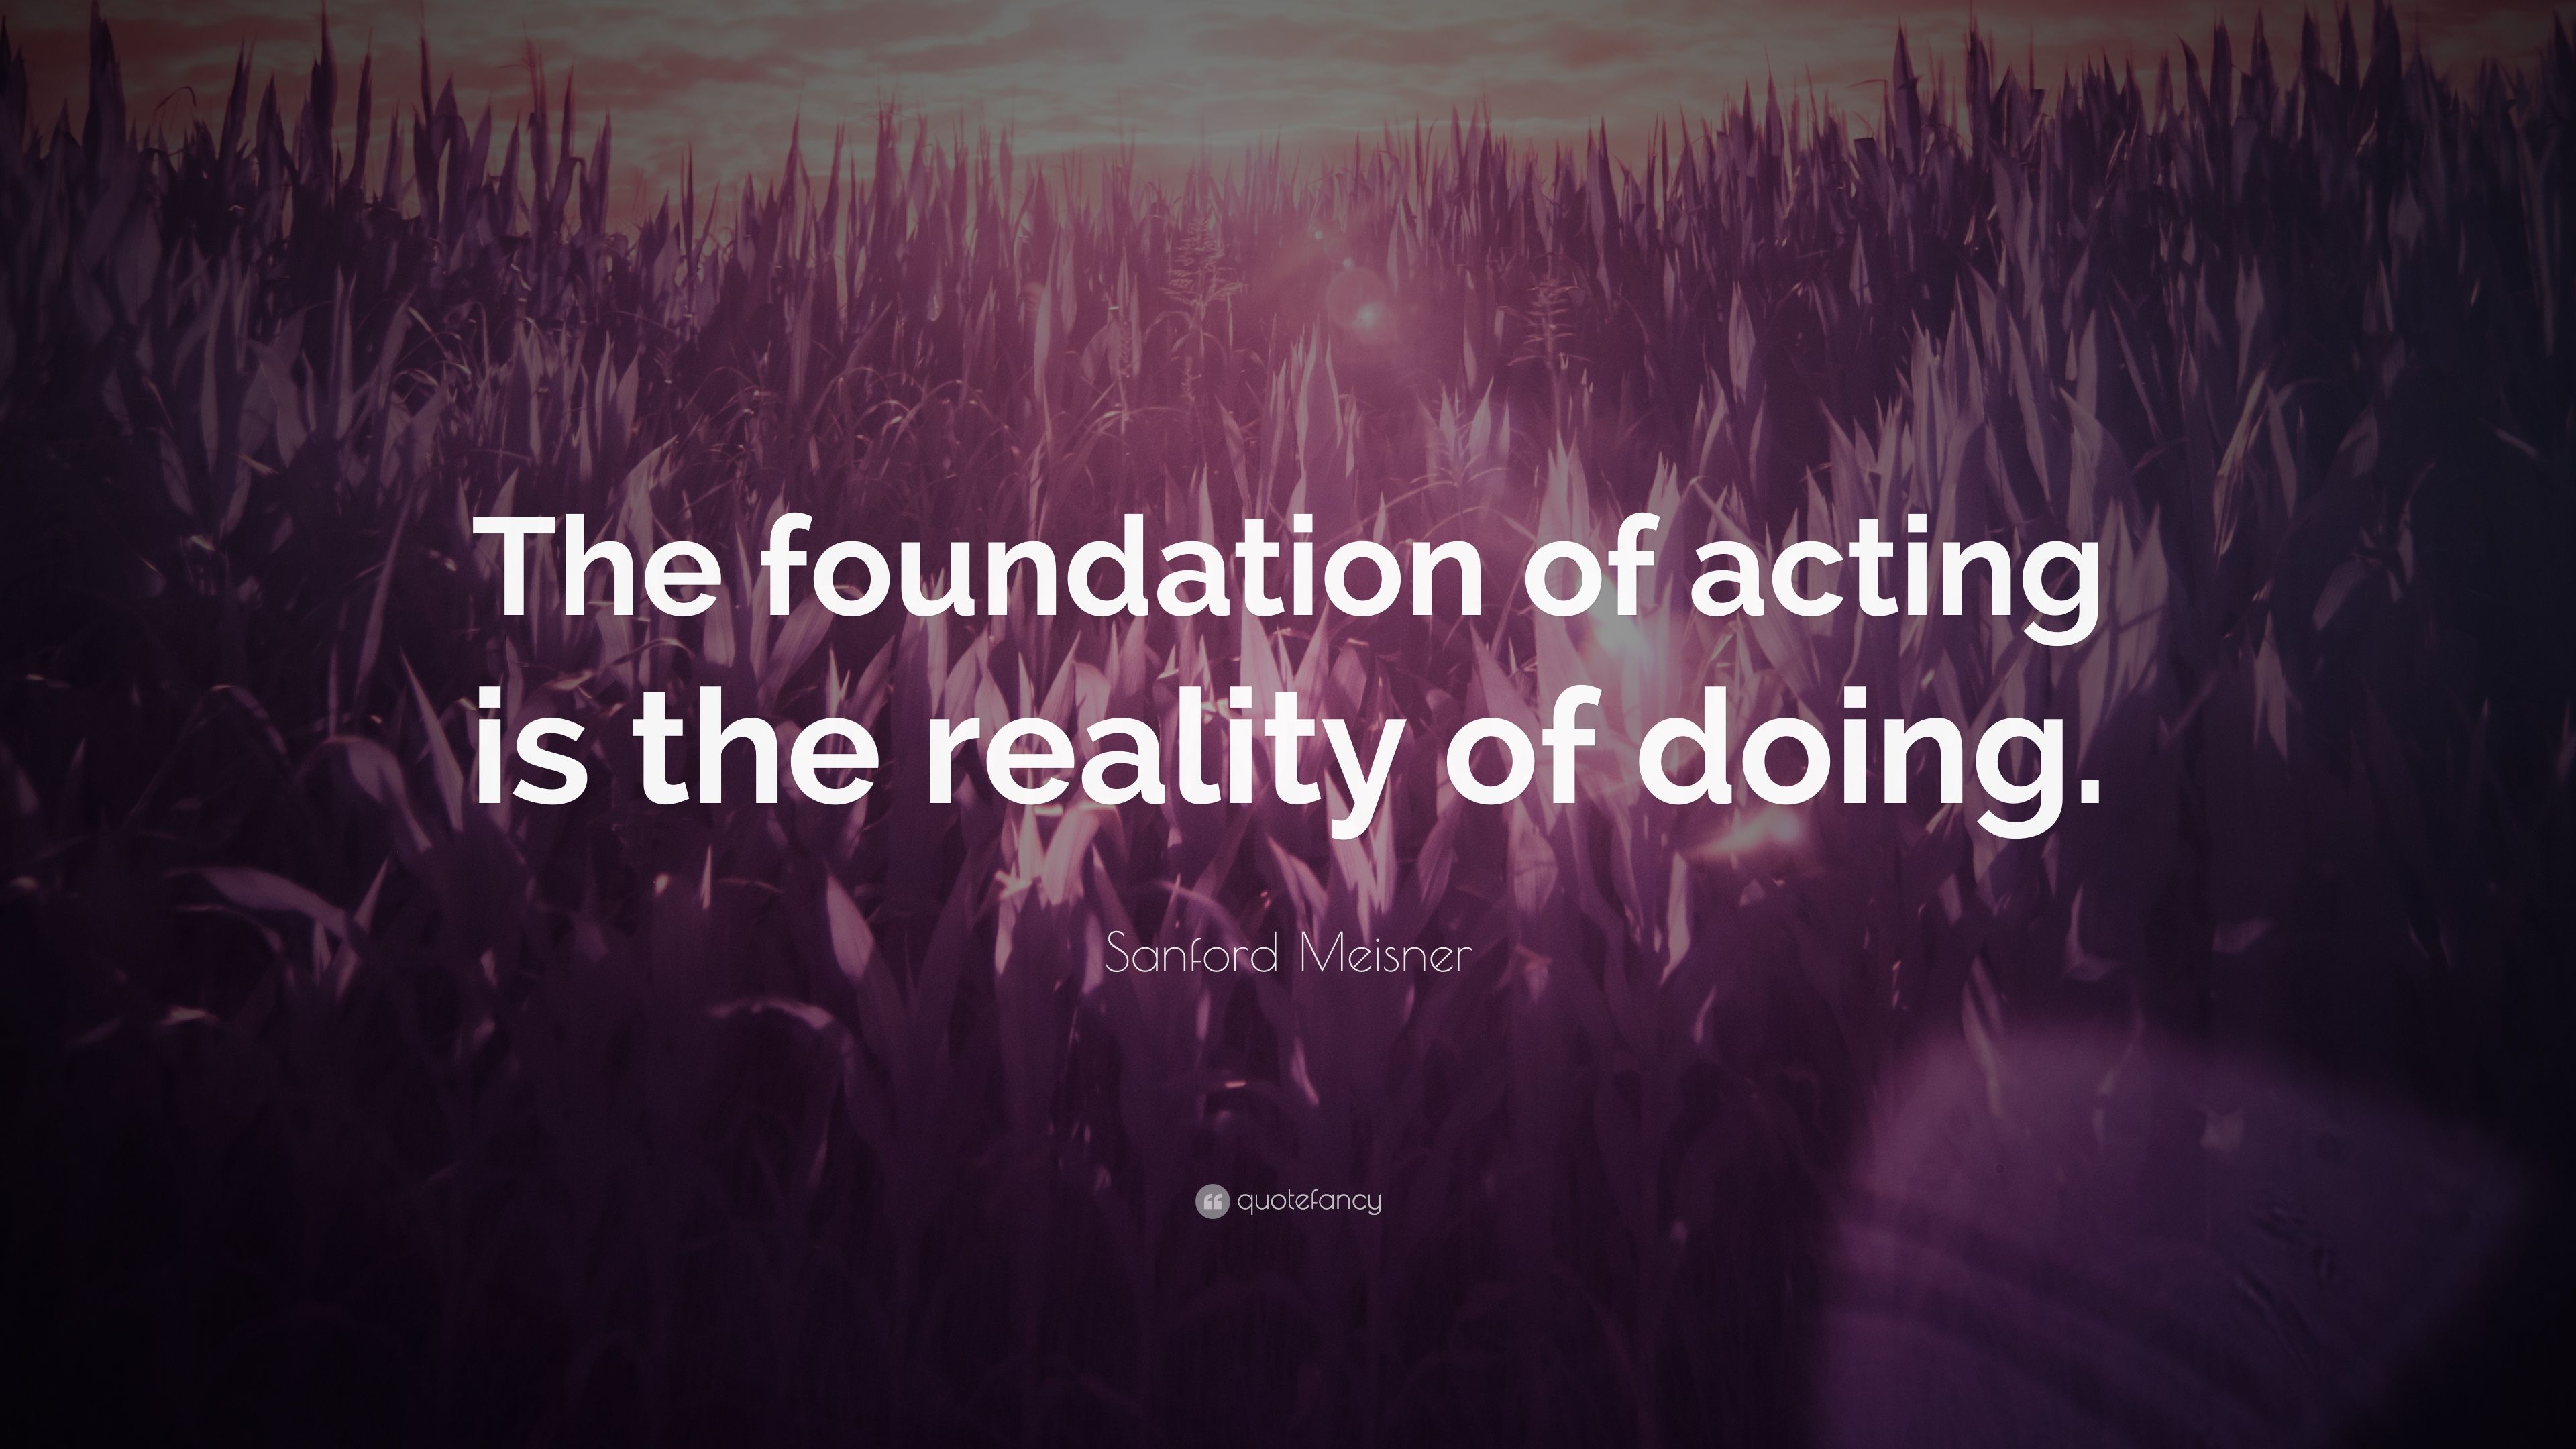 Sanford Meisner Quote: “The foundation of acting is the reality